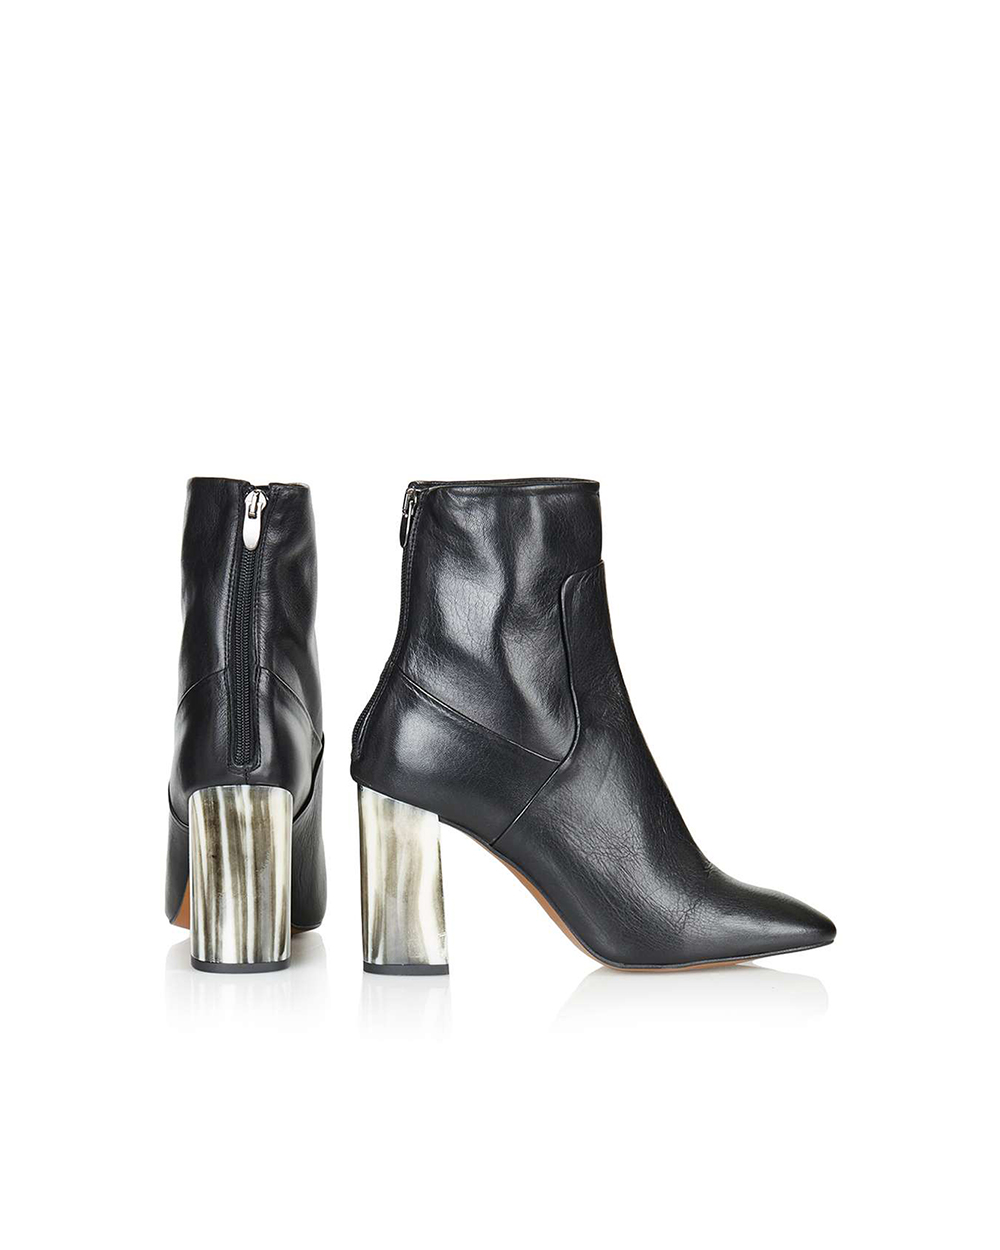 Muse Bone Heel Boot, 85 Pound Stirling, from Topshop